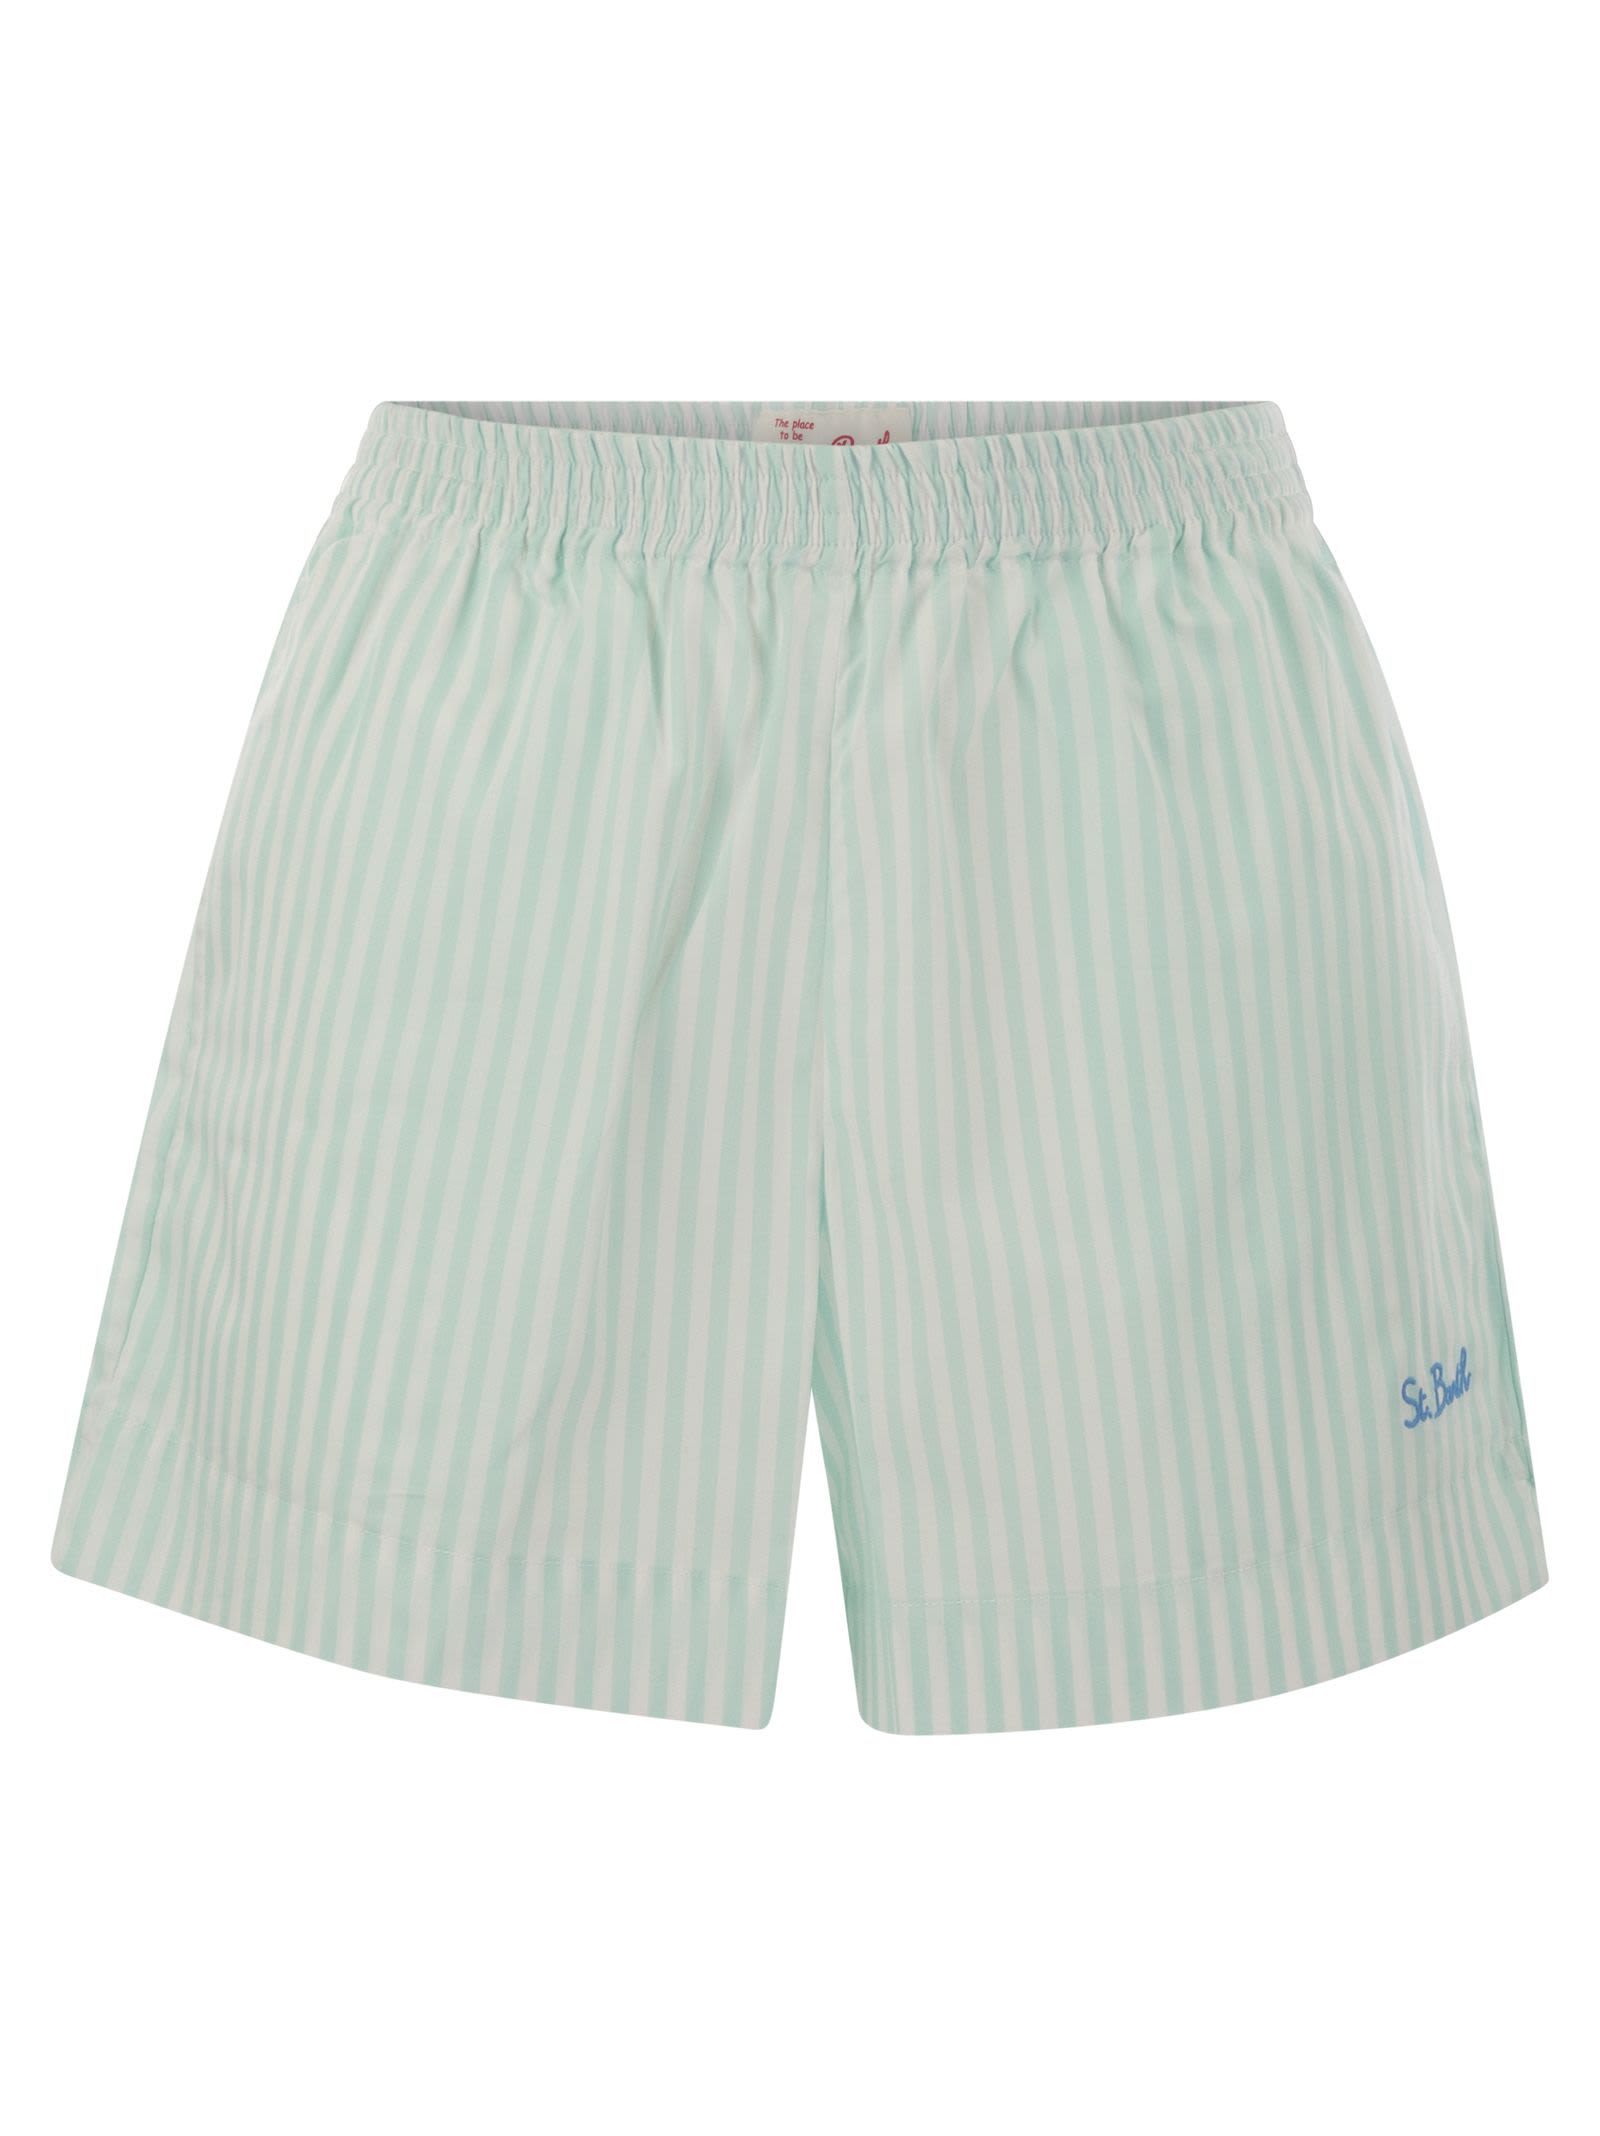 Meave - Striped Cotton Shorts